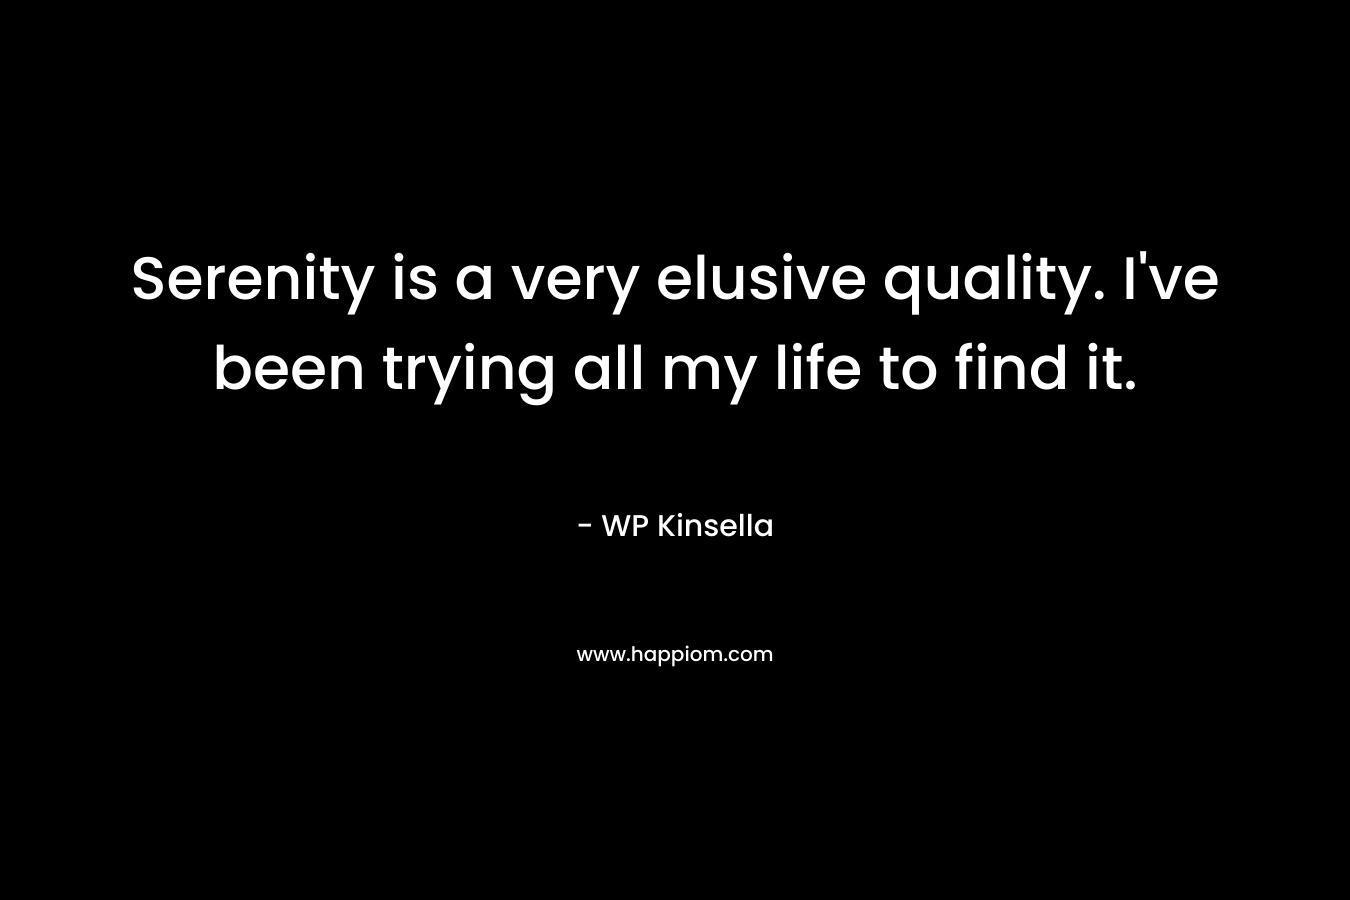 Serenity is a very elusive quality. I've been trying all my life to find it.